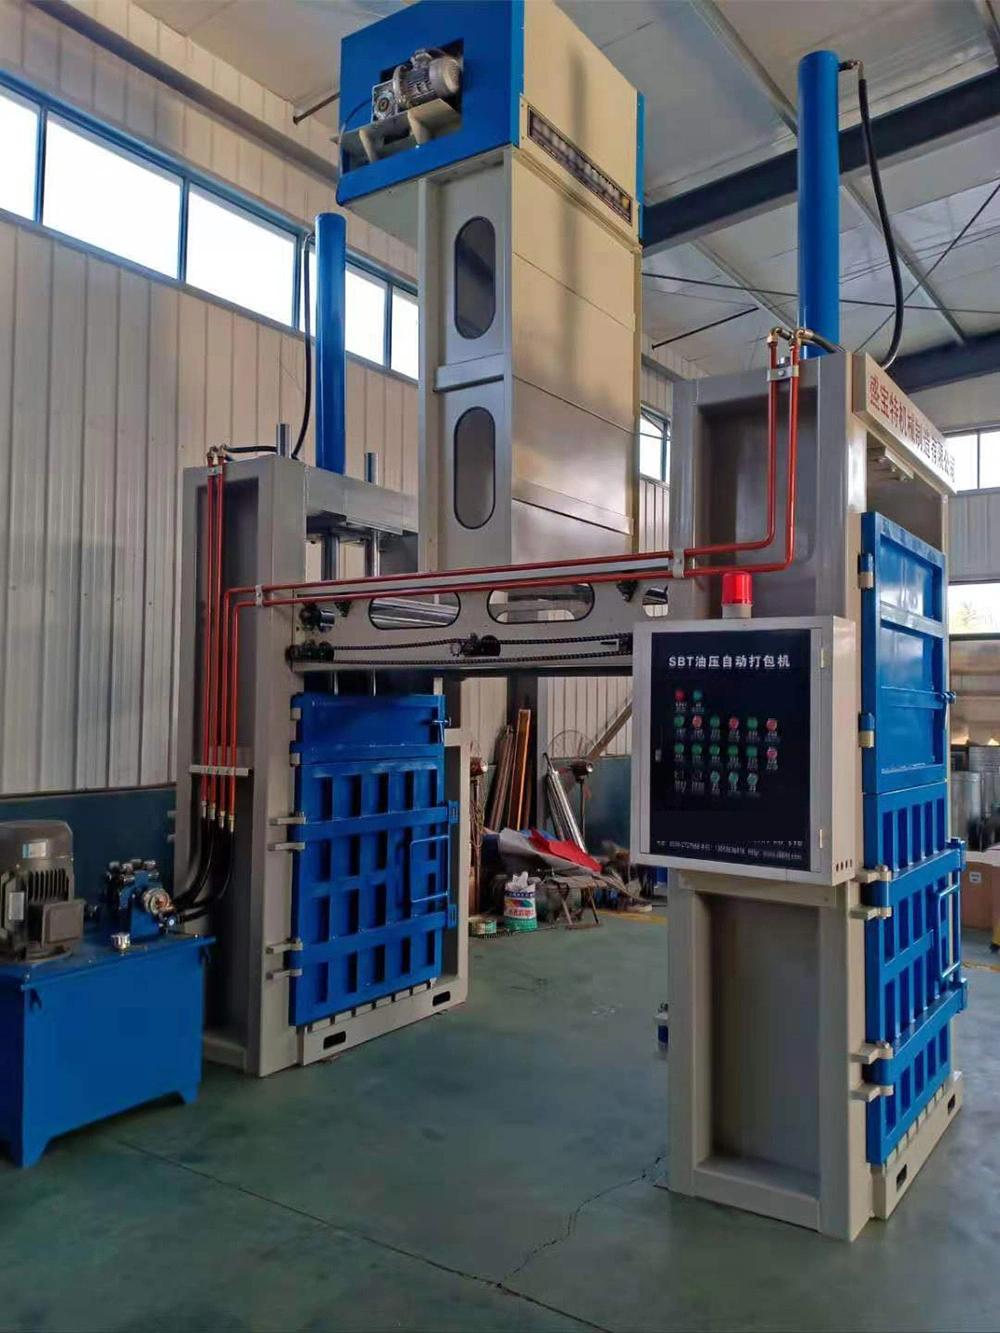 Hot Sale Vertical Pressure Balance System Baler Hydraulic Press Waste Plastic Film Packaging Machine Factory Price Baler for Recycling Industry